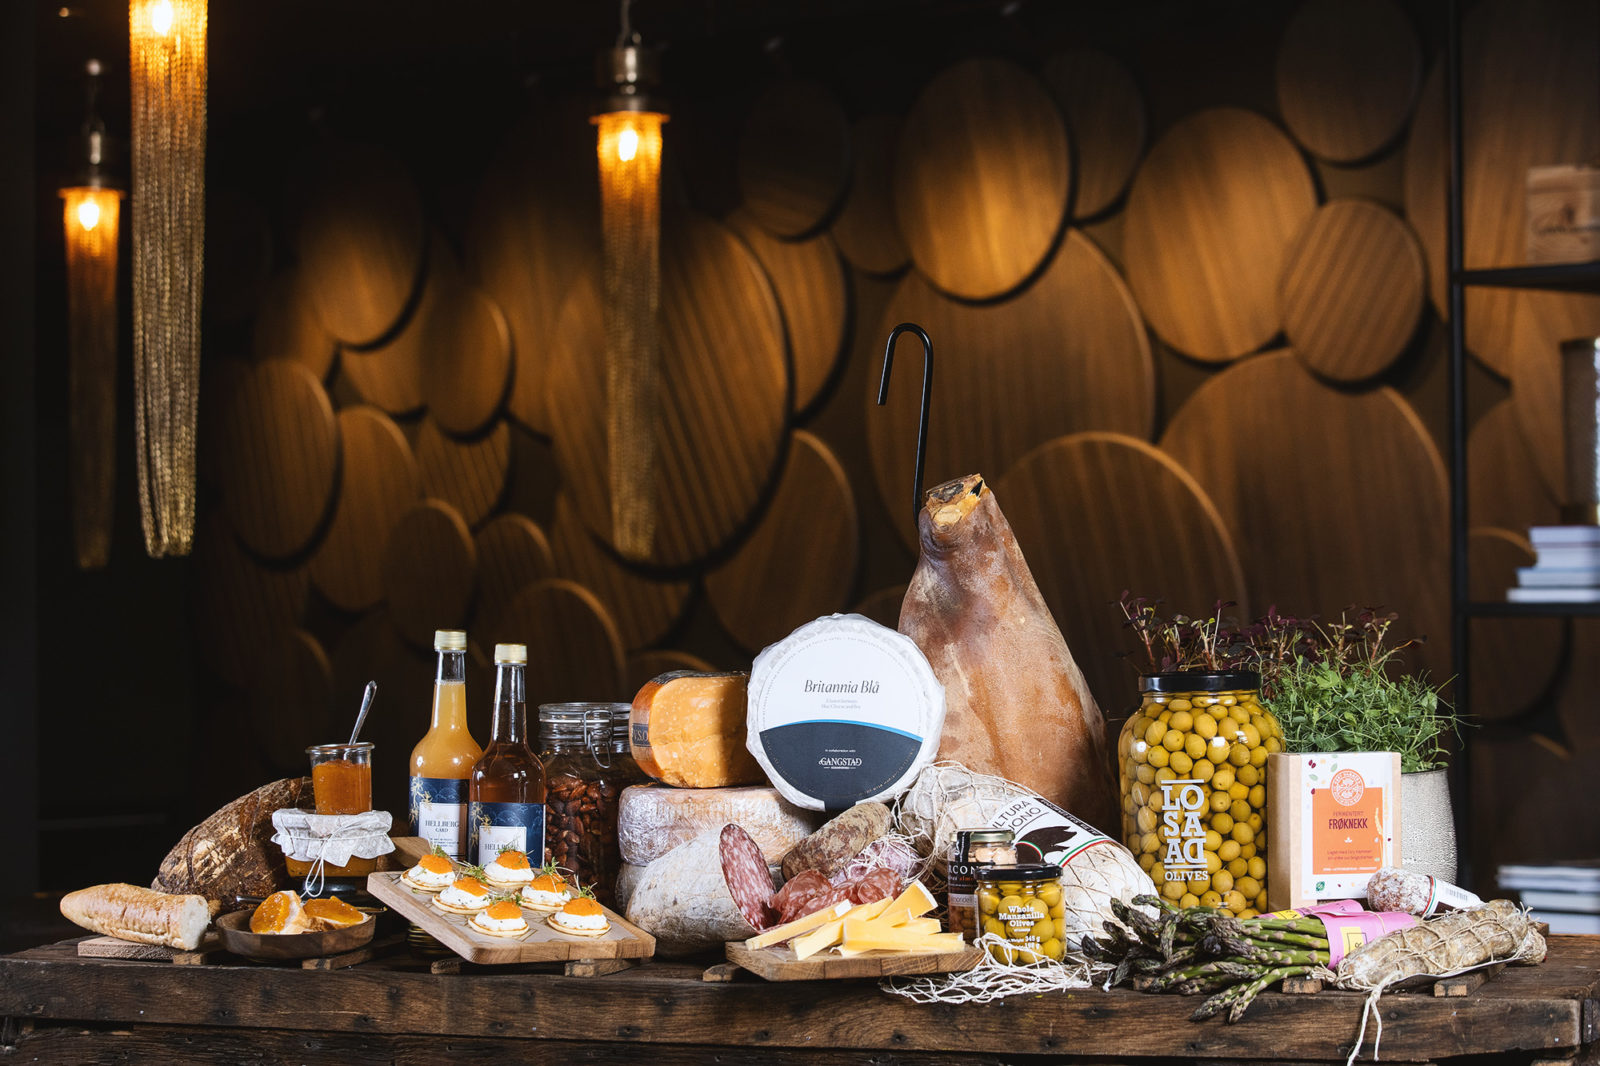 A display of hams, cheeses, blinis, olives and other deli items, as found in the Weekend pack at Vinbaren's Delicatessen, located at Britannia Hotel in Trondheim, Norway.